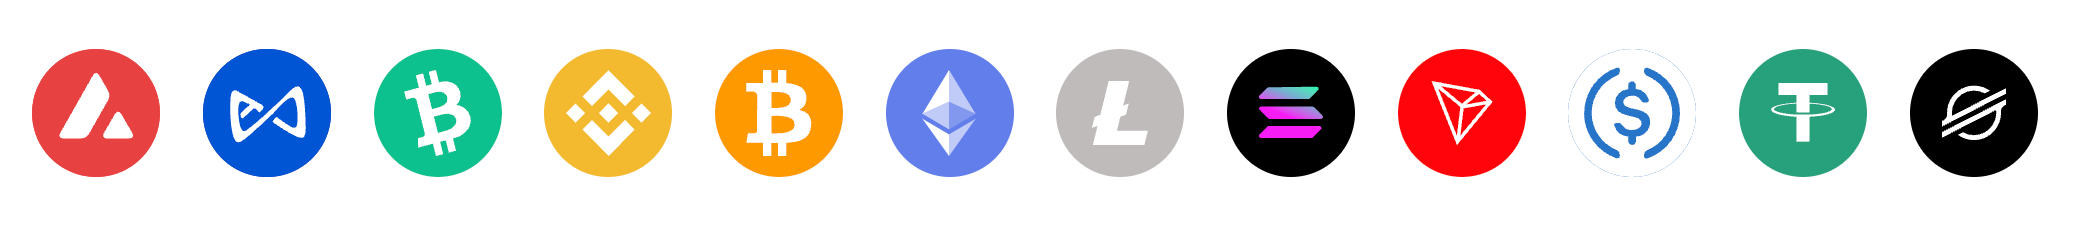 An image of several cryptocurrency logos, such as Bitcoin and altcoins like Bitcoin Cash and Ethereum.